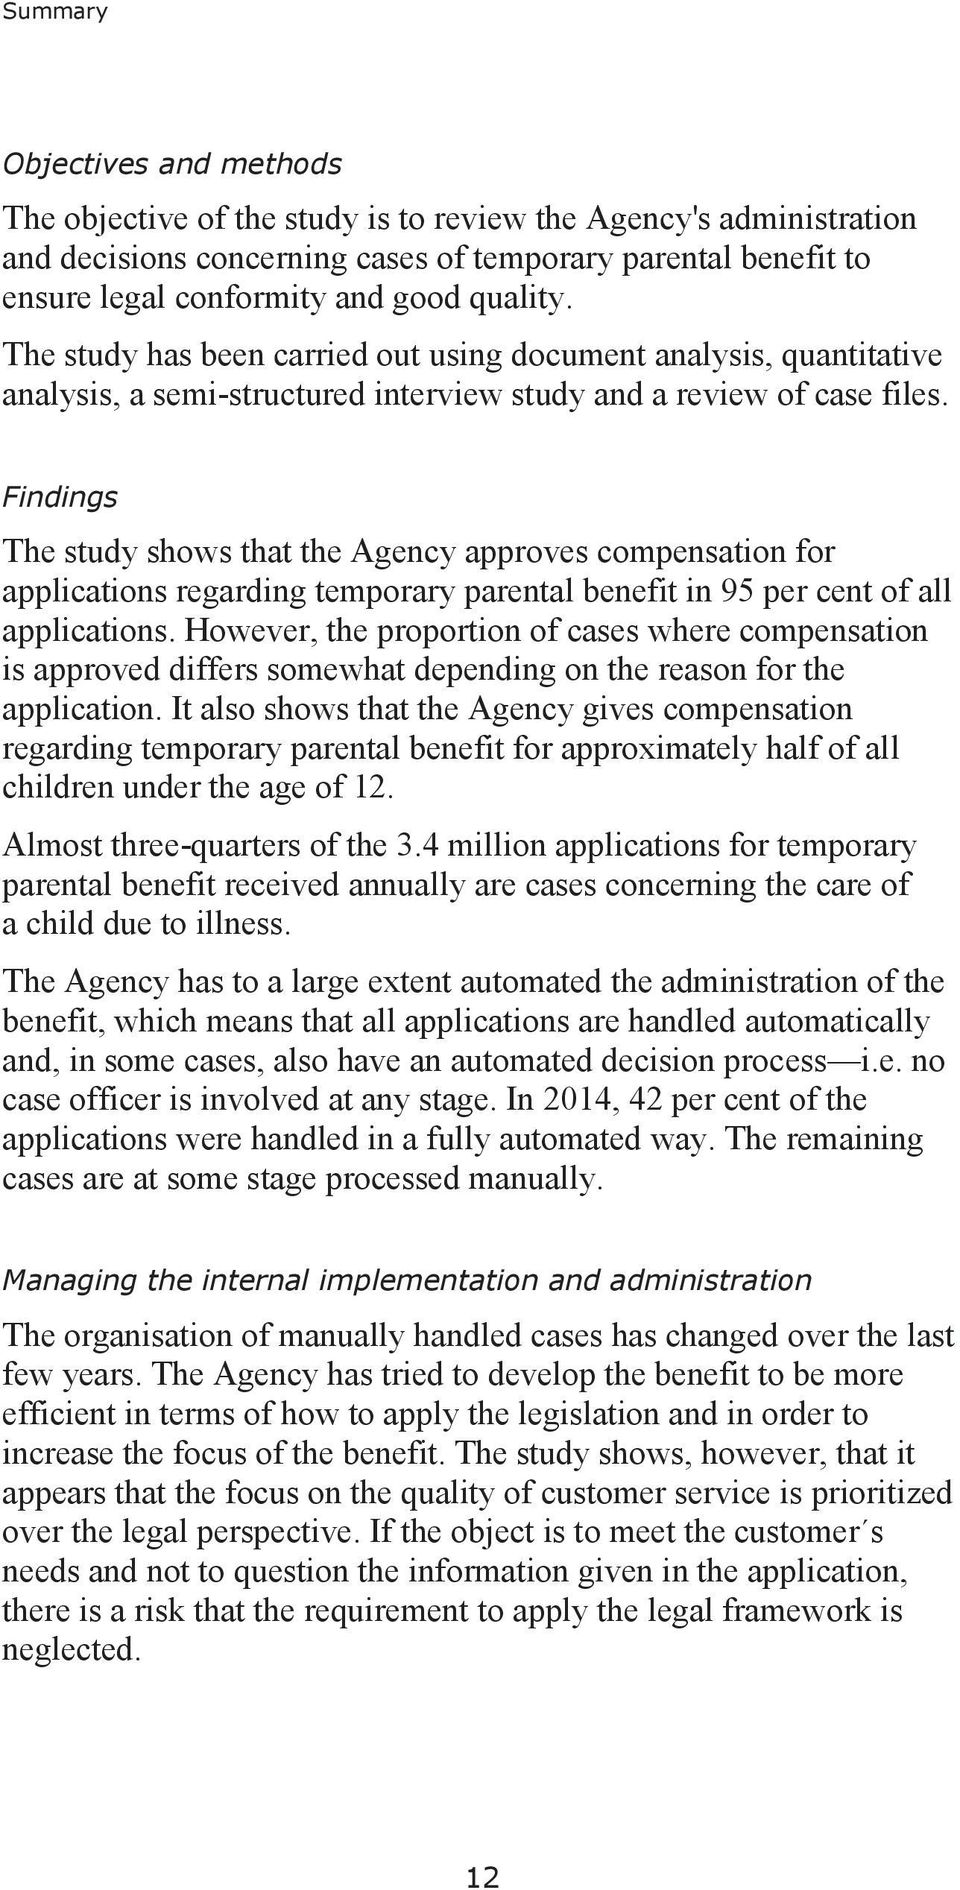 Findings The study shows that the Agency approves compensation for applications regarding temporary parental benefit in 95 per cent of all applications.